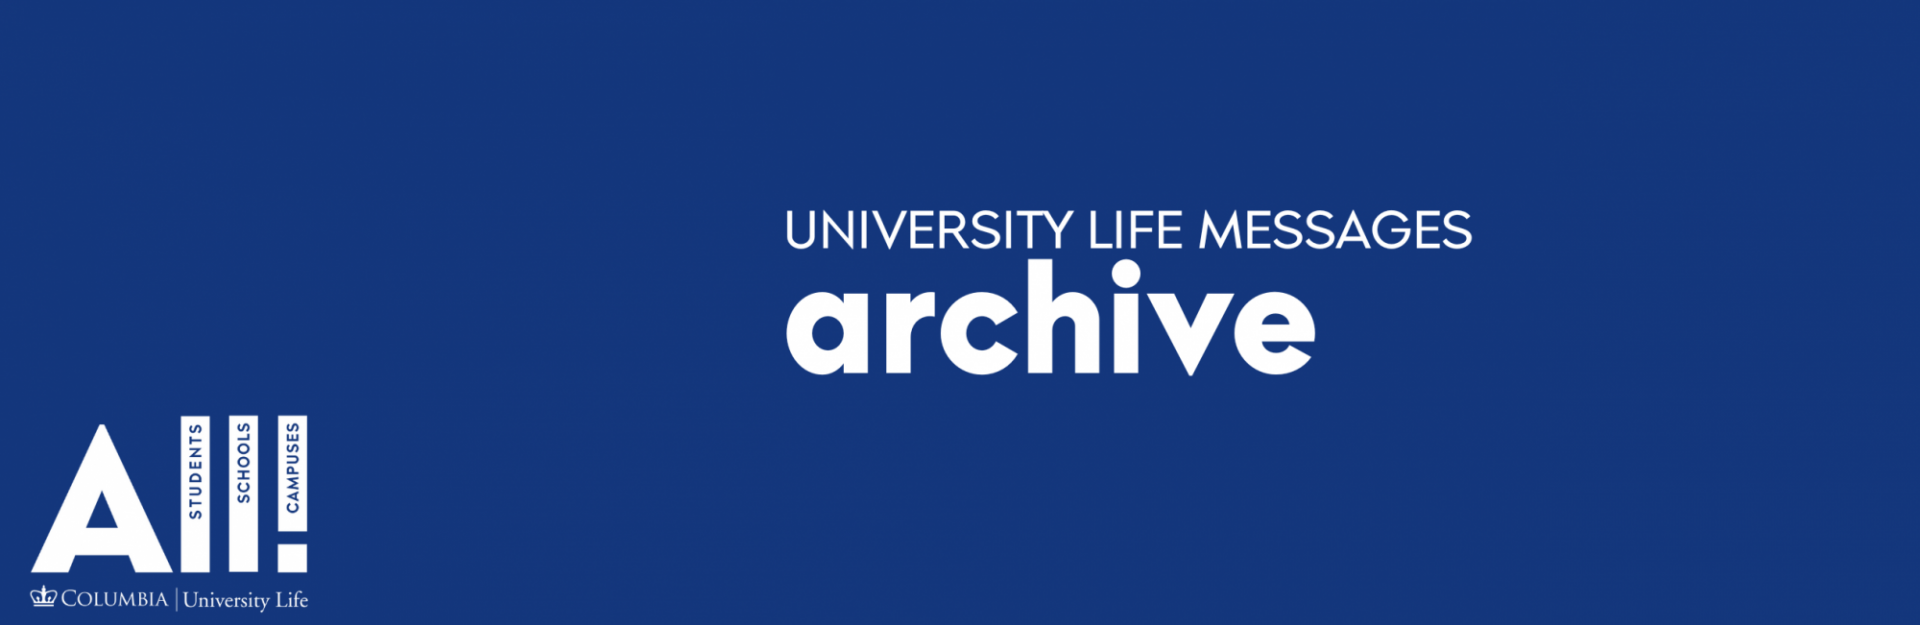 blue rectangle with University Life All! Logo and "University Life Messages Archive" 